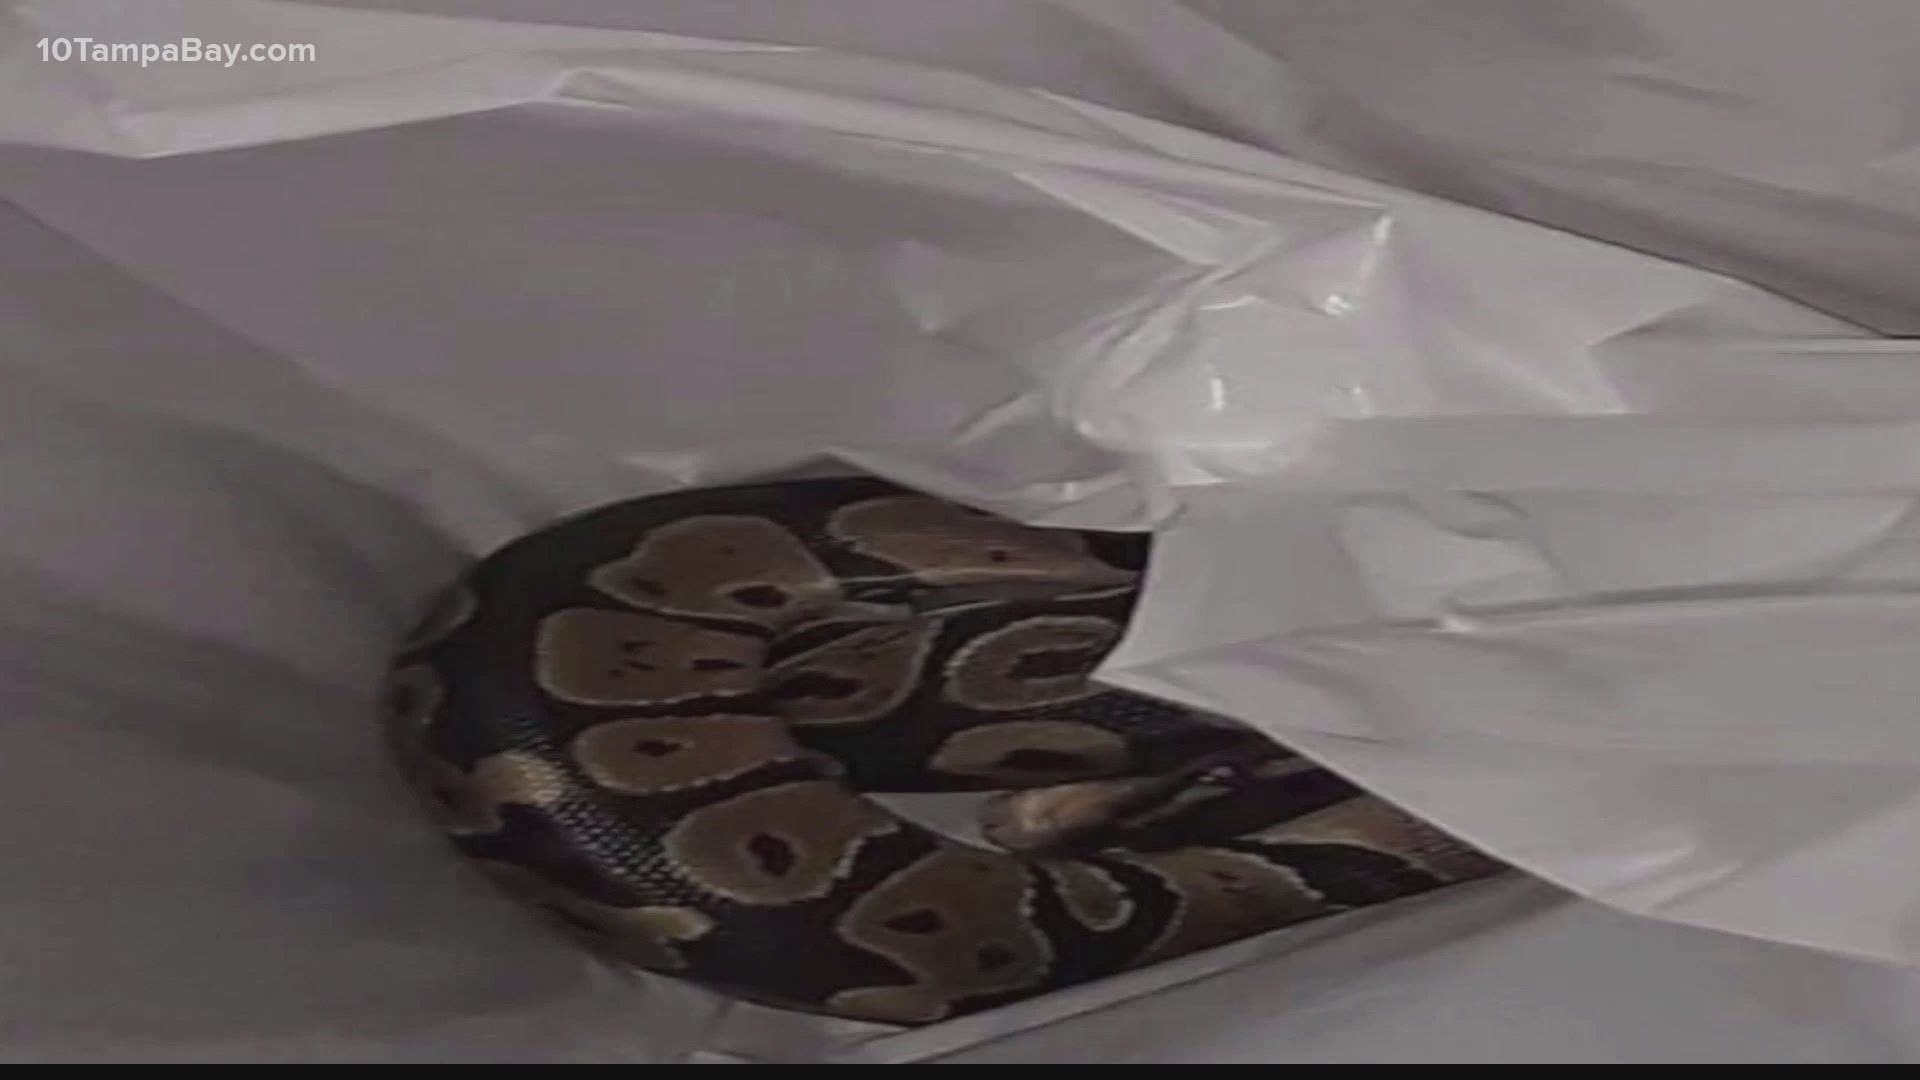 A woman in West Palm Beach says she was shocked when she opened the lid to her washing machine and found a python inside.